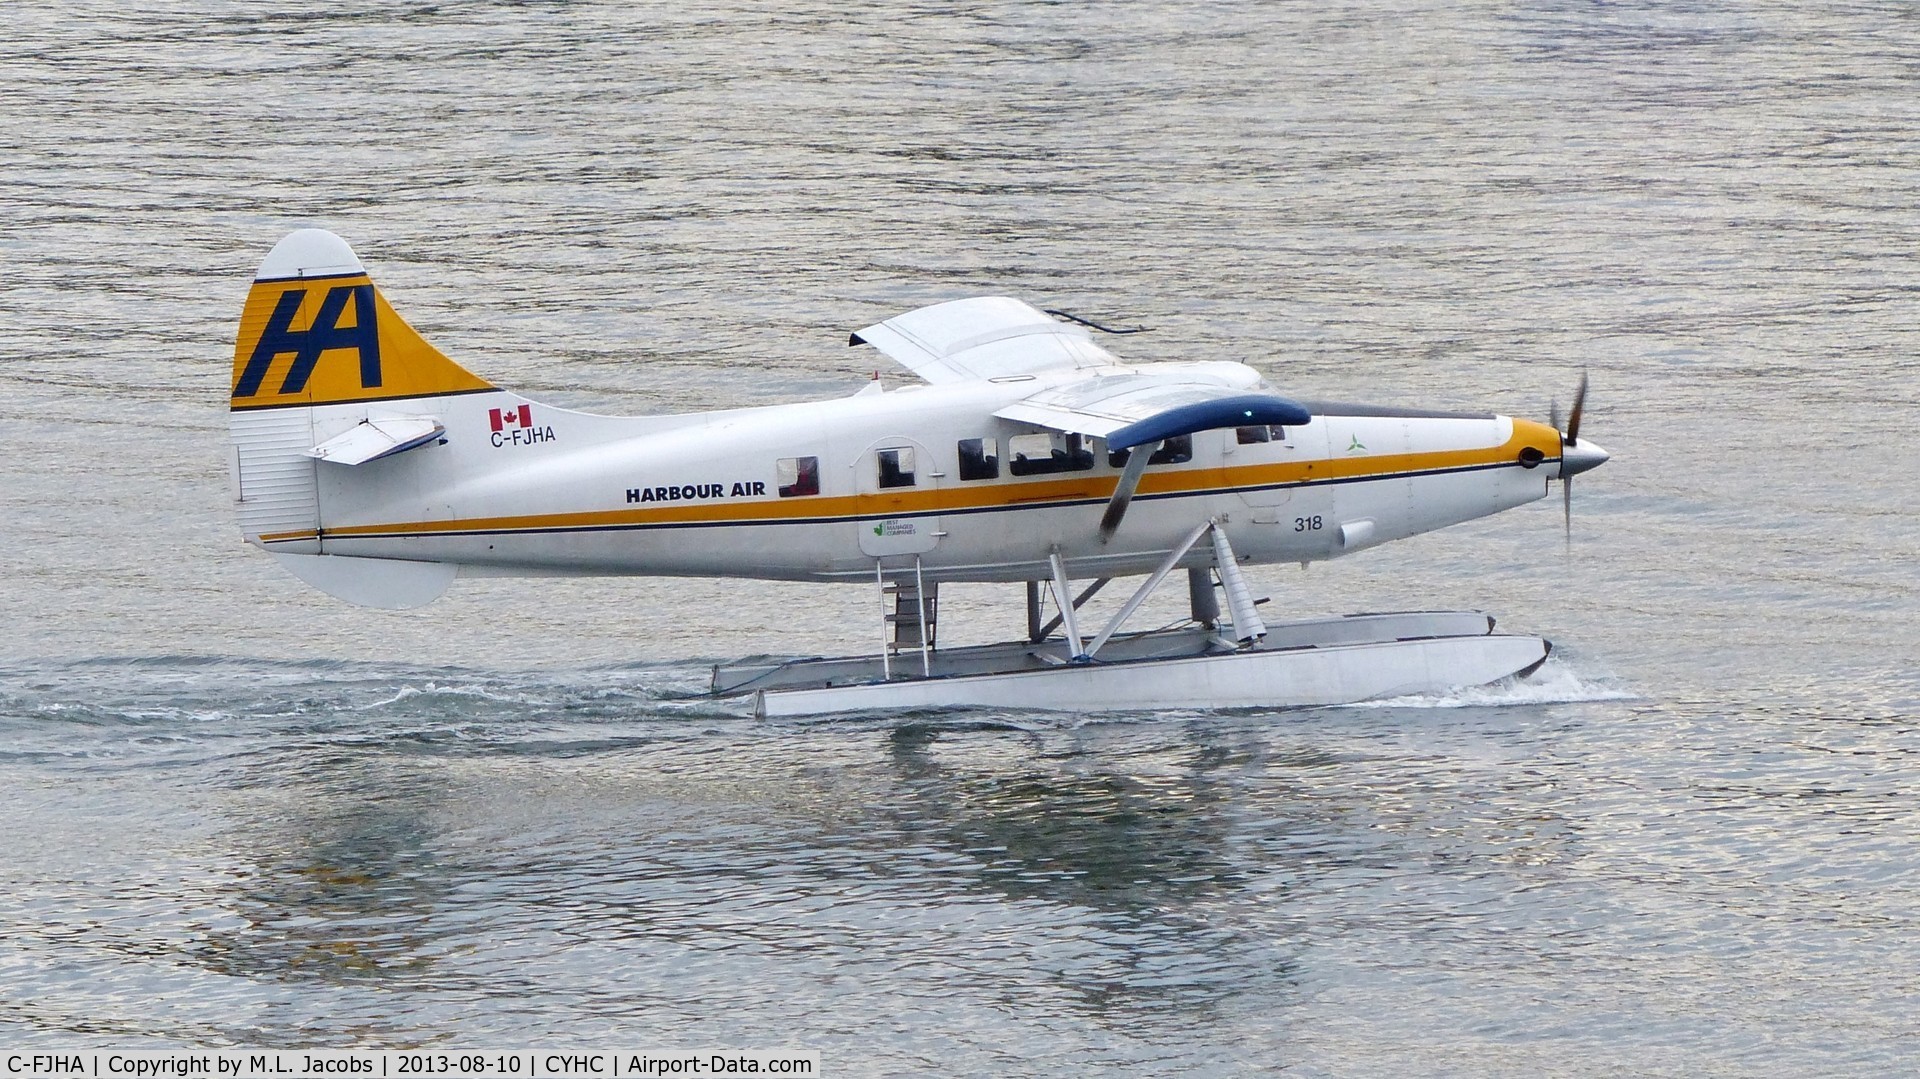 C-FJHA, 1960 De Havilland Canada DHC-3 Turbo Otter Otter C/N 393, Harbour Air #318 taxiing for departure from Coal Harbour.